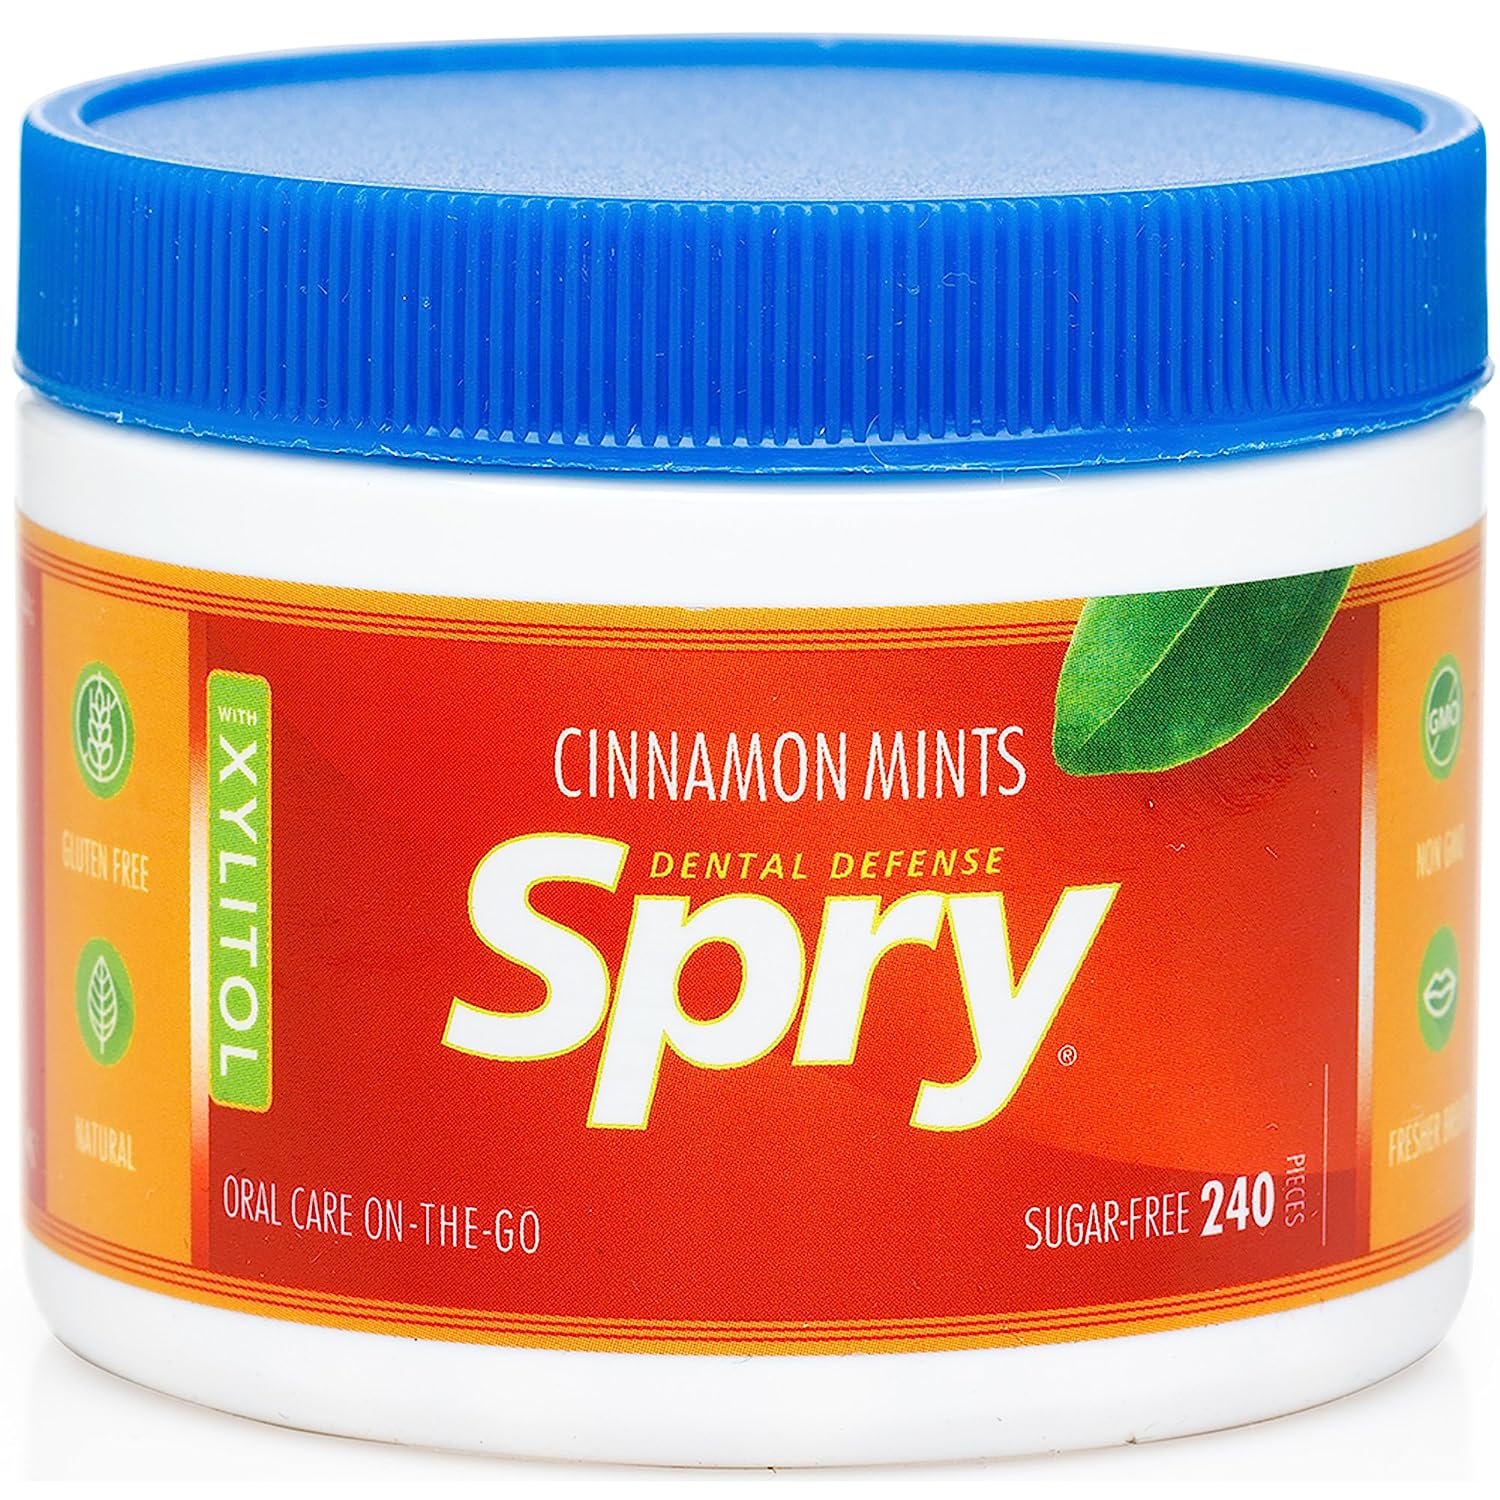 Spry Xylitol Cinnamon Mints Sugar Free Candy - Breath Mints That Promote Oral Health, Dry Mouth Mints That Increase Sali